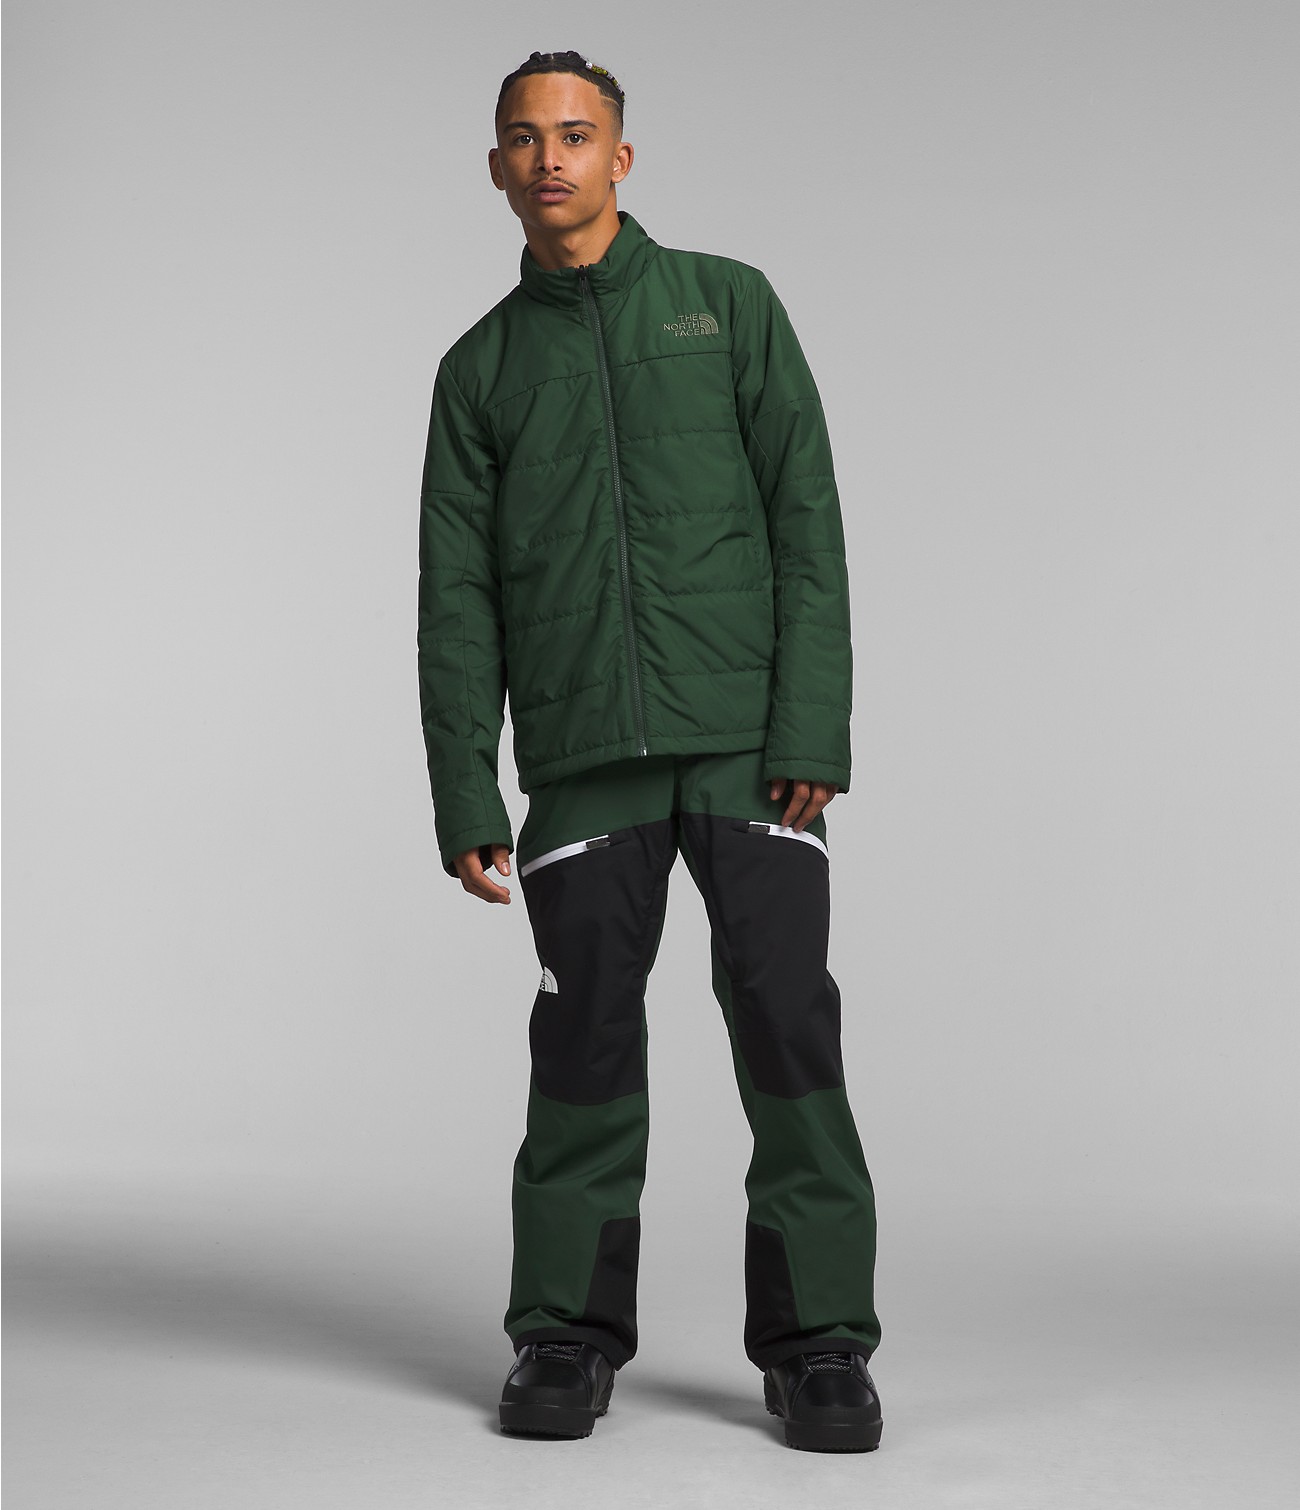 Men’s Clement Triclimate® Jacket | The North Face